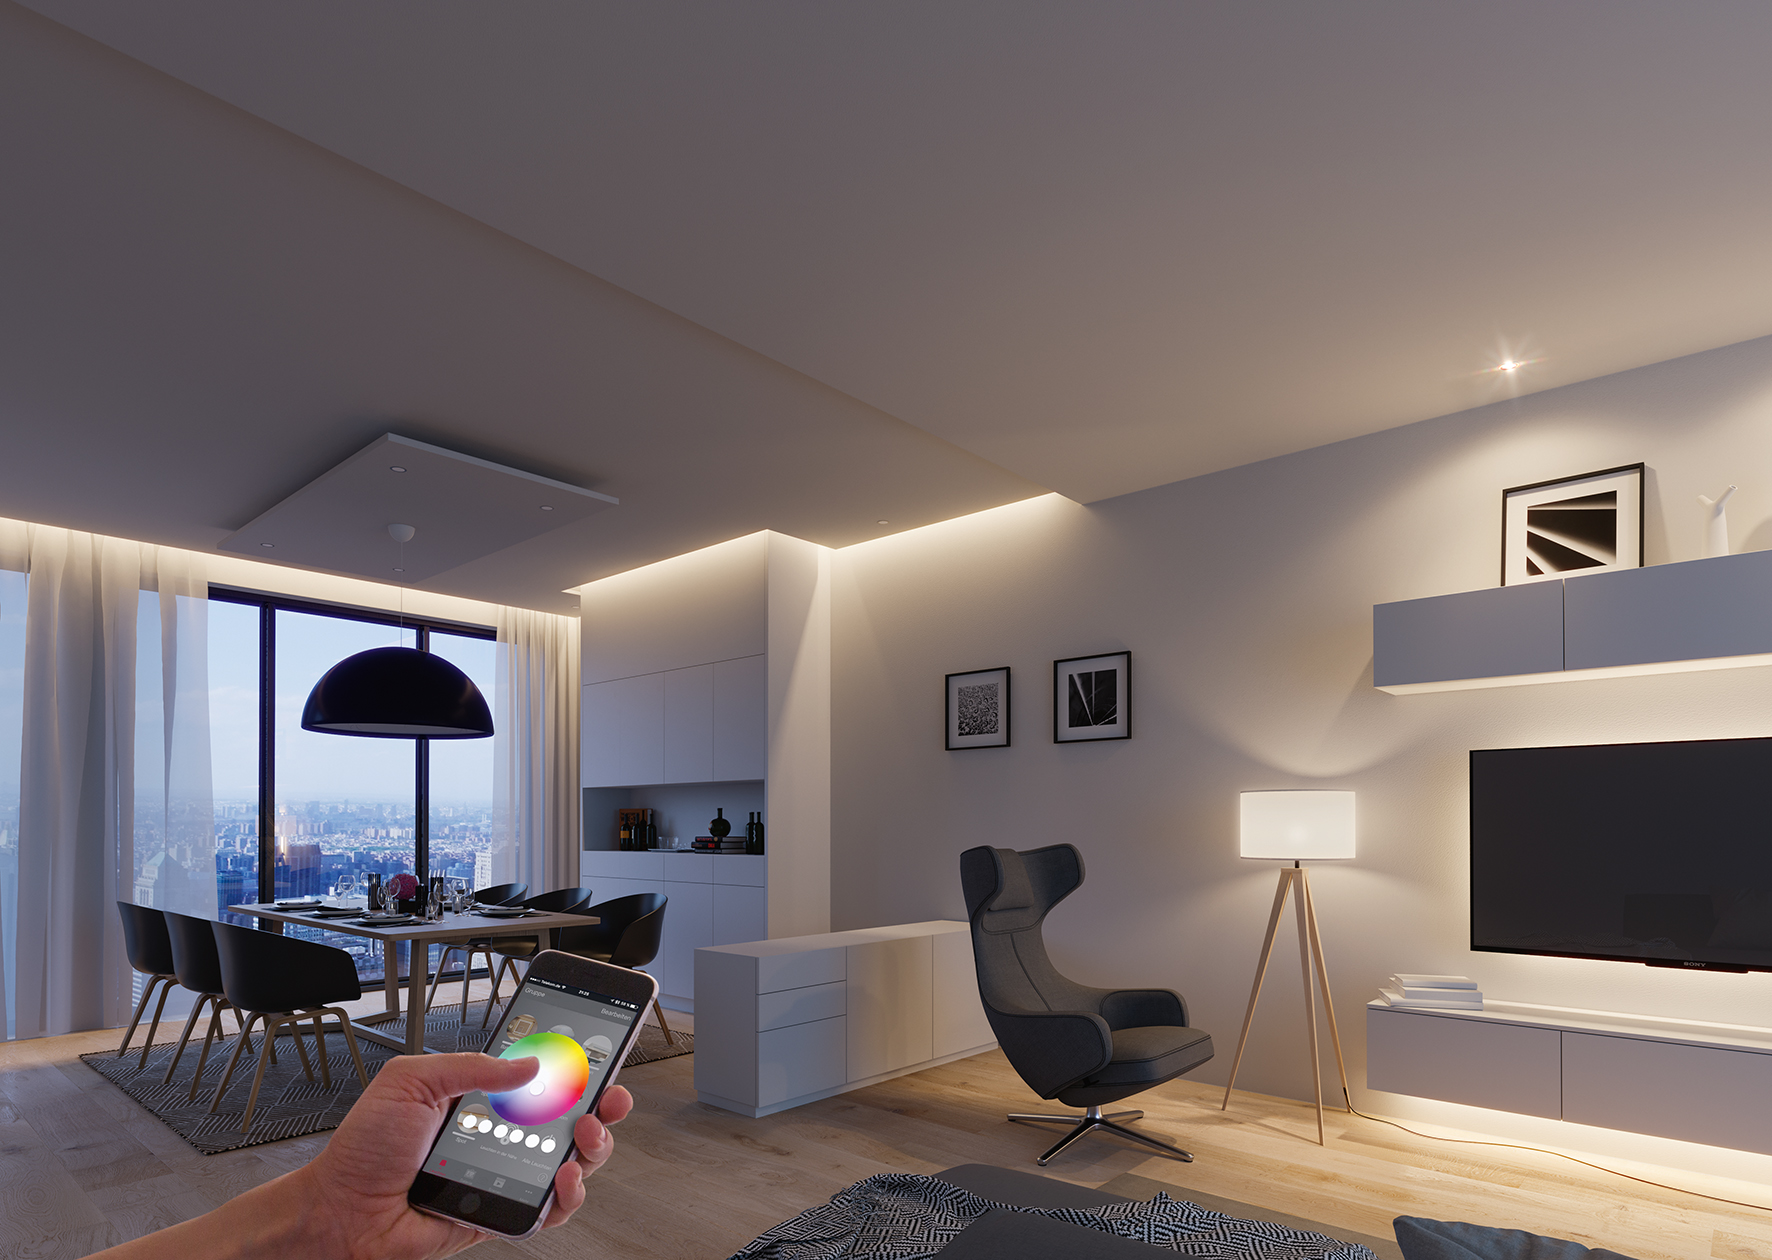 Häfele Connect, a self-developed app for smartphones and tablets, networks and controls light and sound as well as electrical drives in furniture. Häfele is also a pioneer in the Smart Home area.